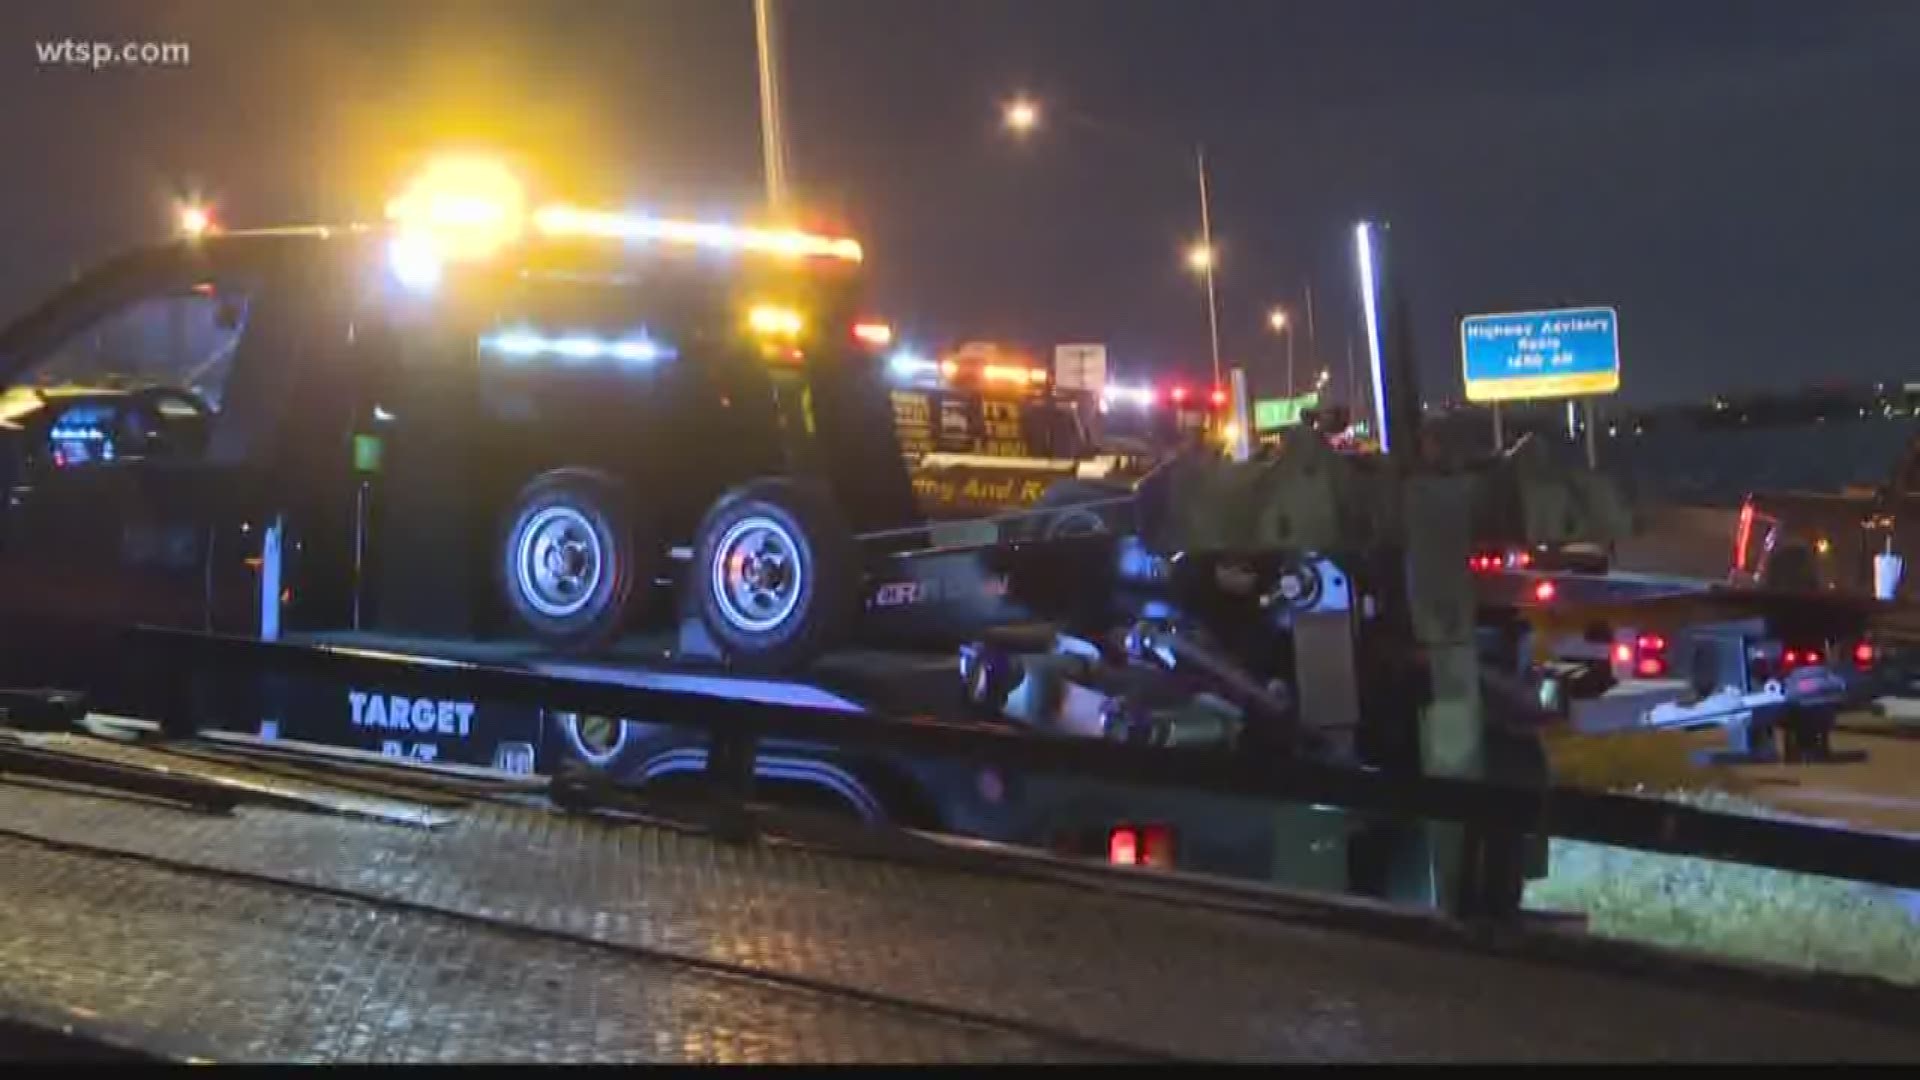 MOVE OVER. IT’S THE LAW. That’s the message of dozens of tow truck drivers lined up along the Tampa side of the Howard Frankland Bridge, where one of their fellow drivers was hit and killed on the job.